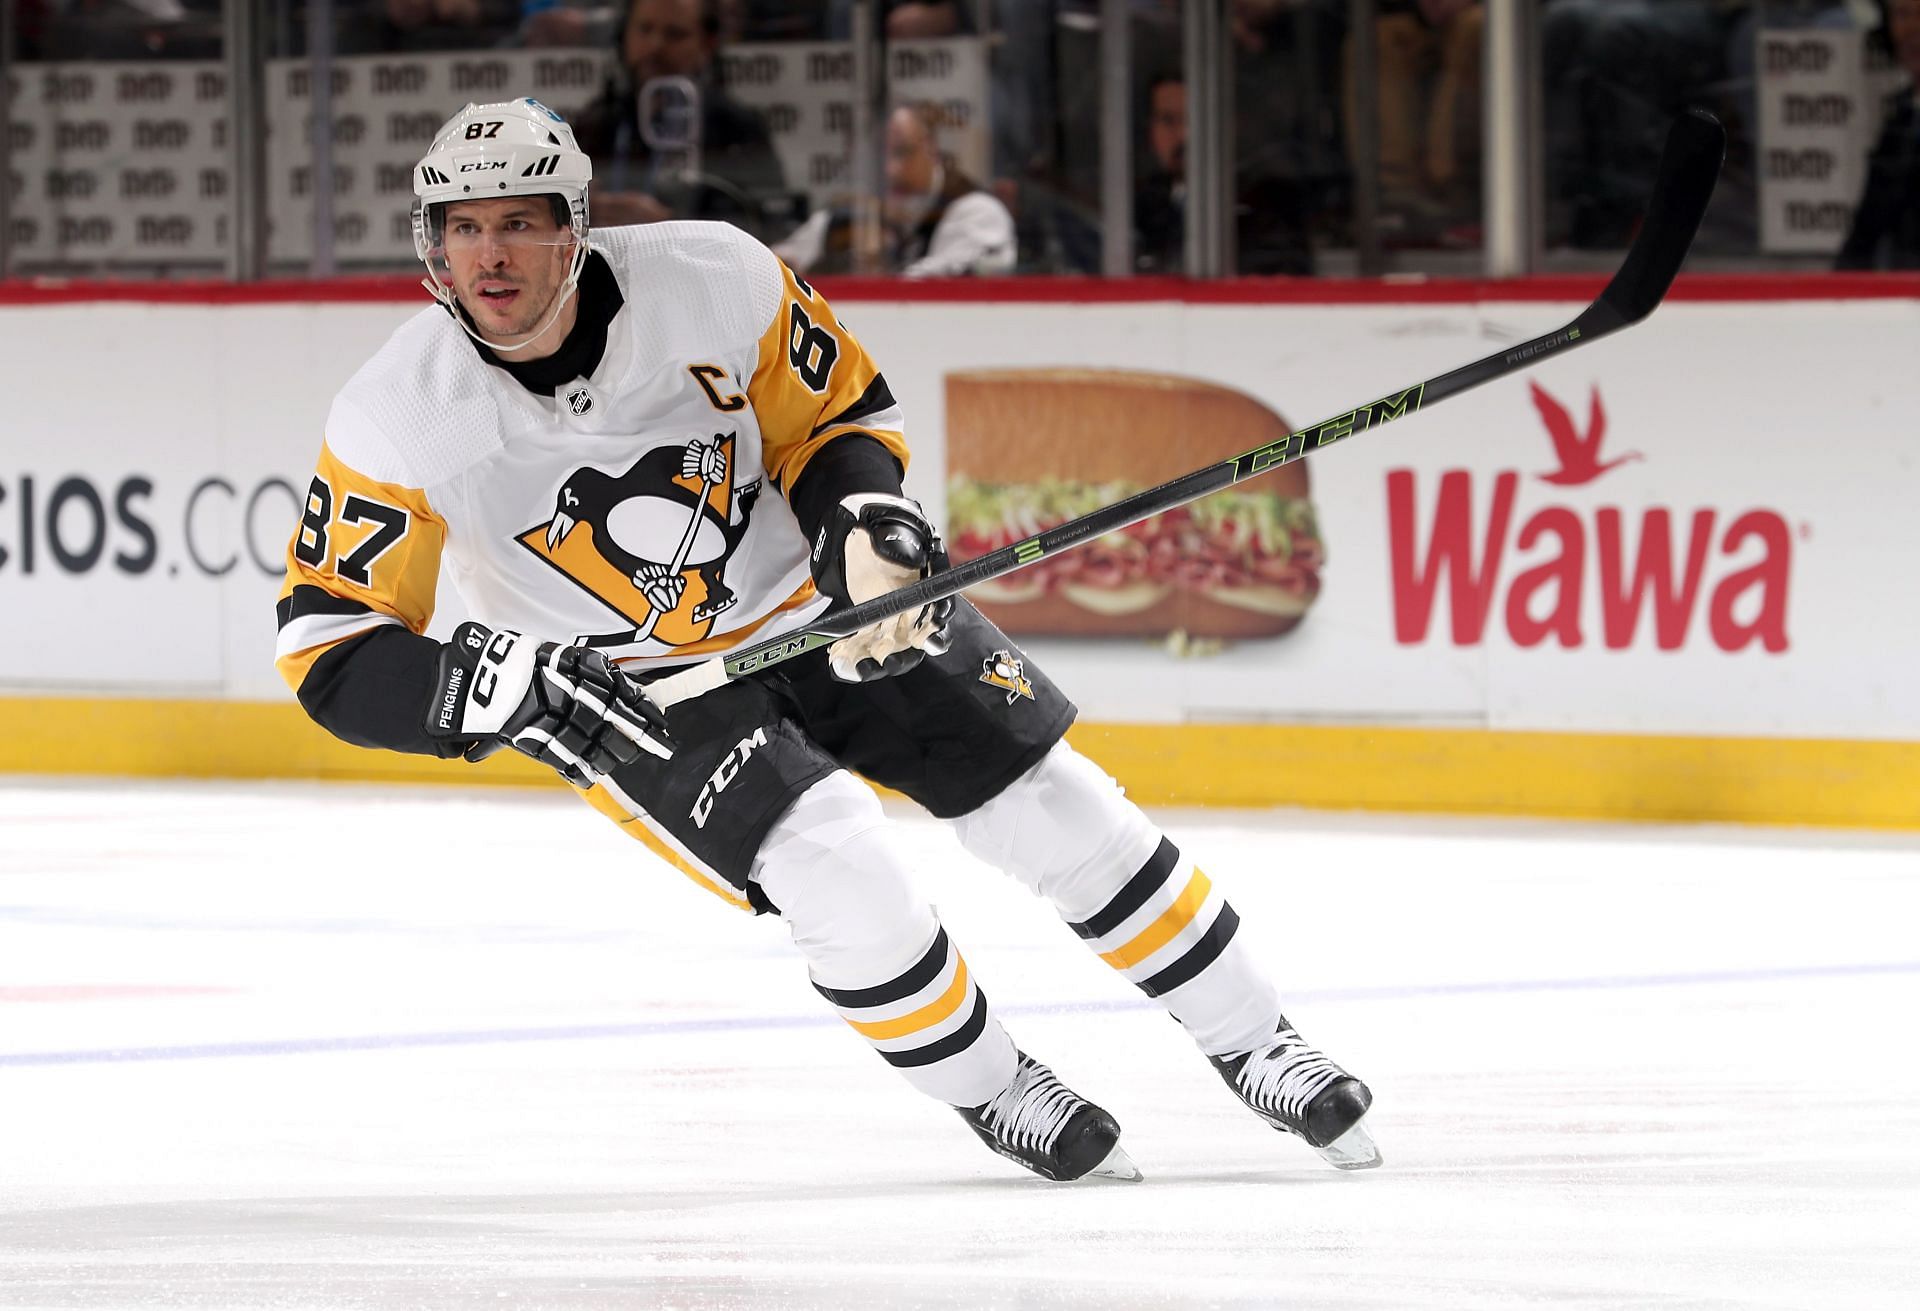 Pittsburgh Penguins vs. New Jersey Devils 2023 Matchup Tickets & Locations